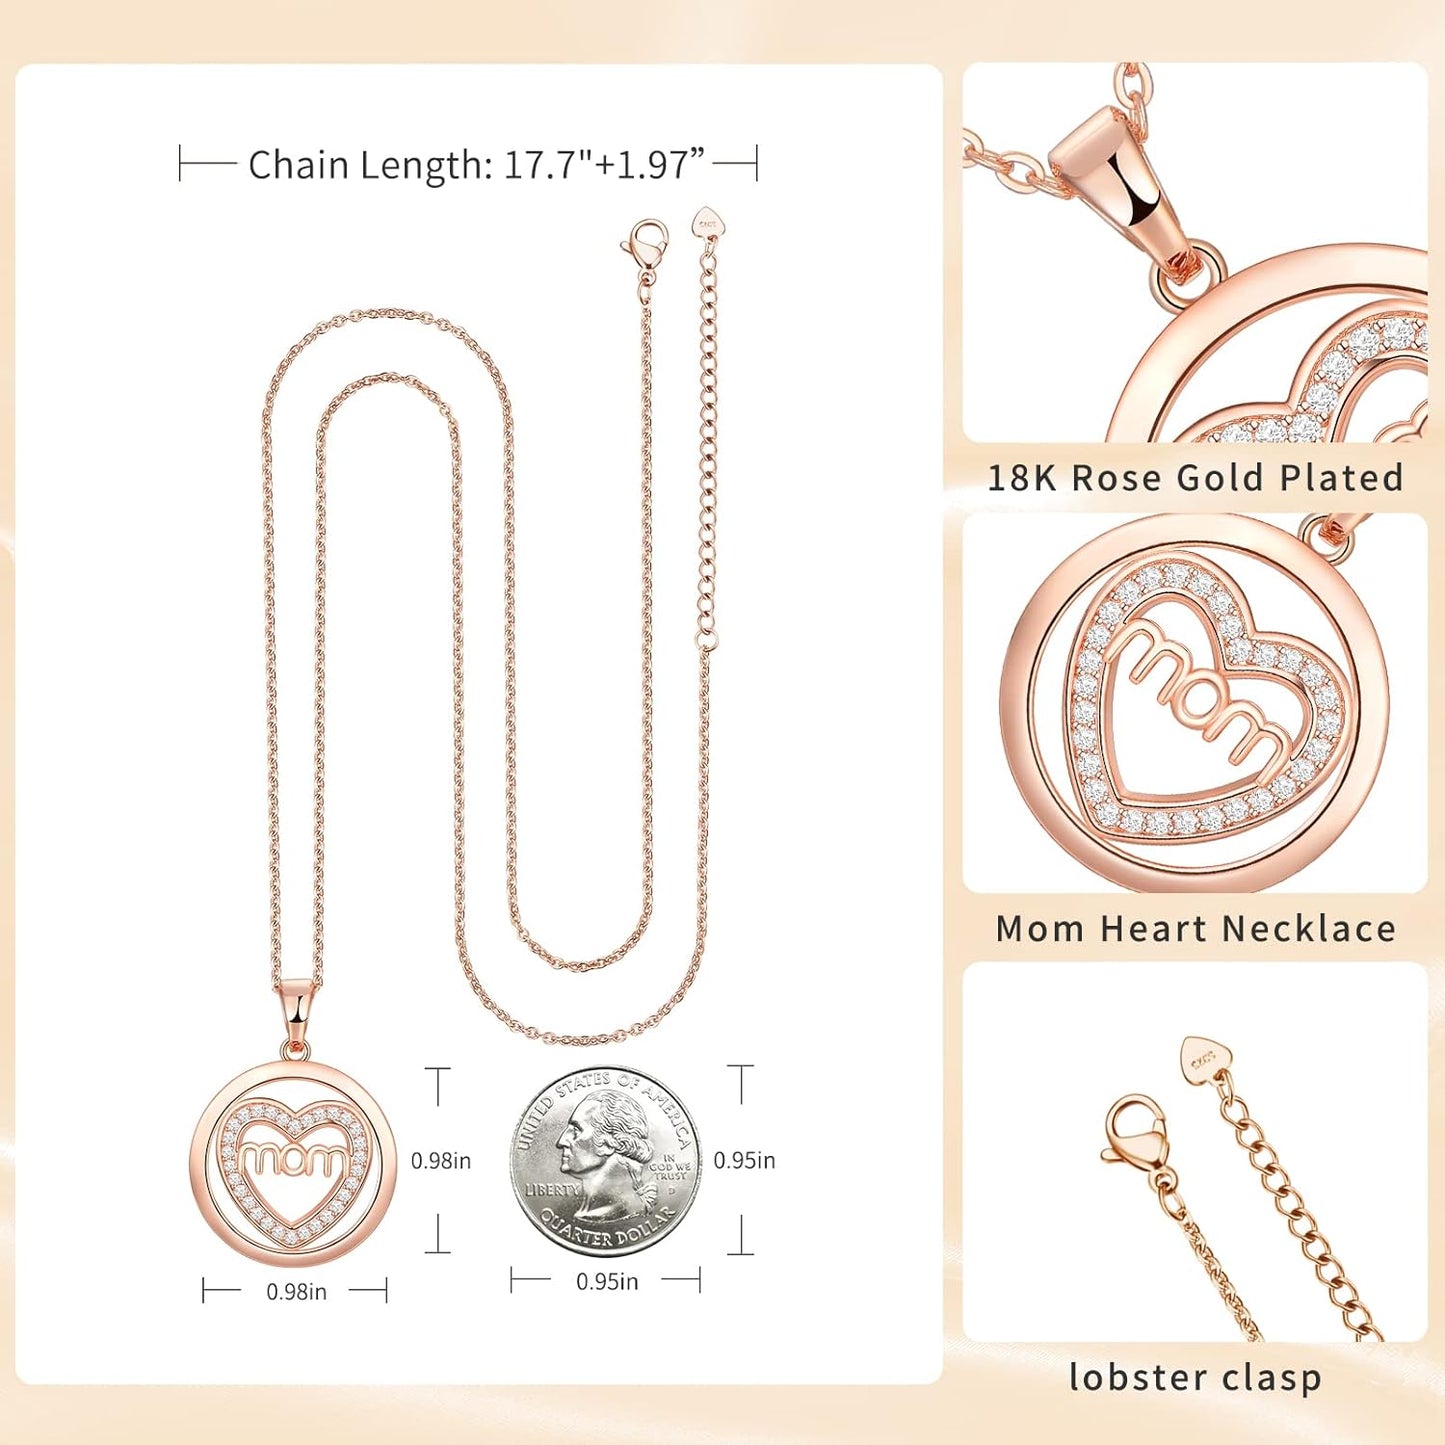 PAITAIN 18K Rose Gold Mom Necklaces Heart Jewelry for Mother Grandmother Wife Gifts for Mothers Day Birthday Anniversary Valentines Day Christmas